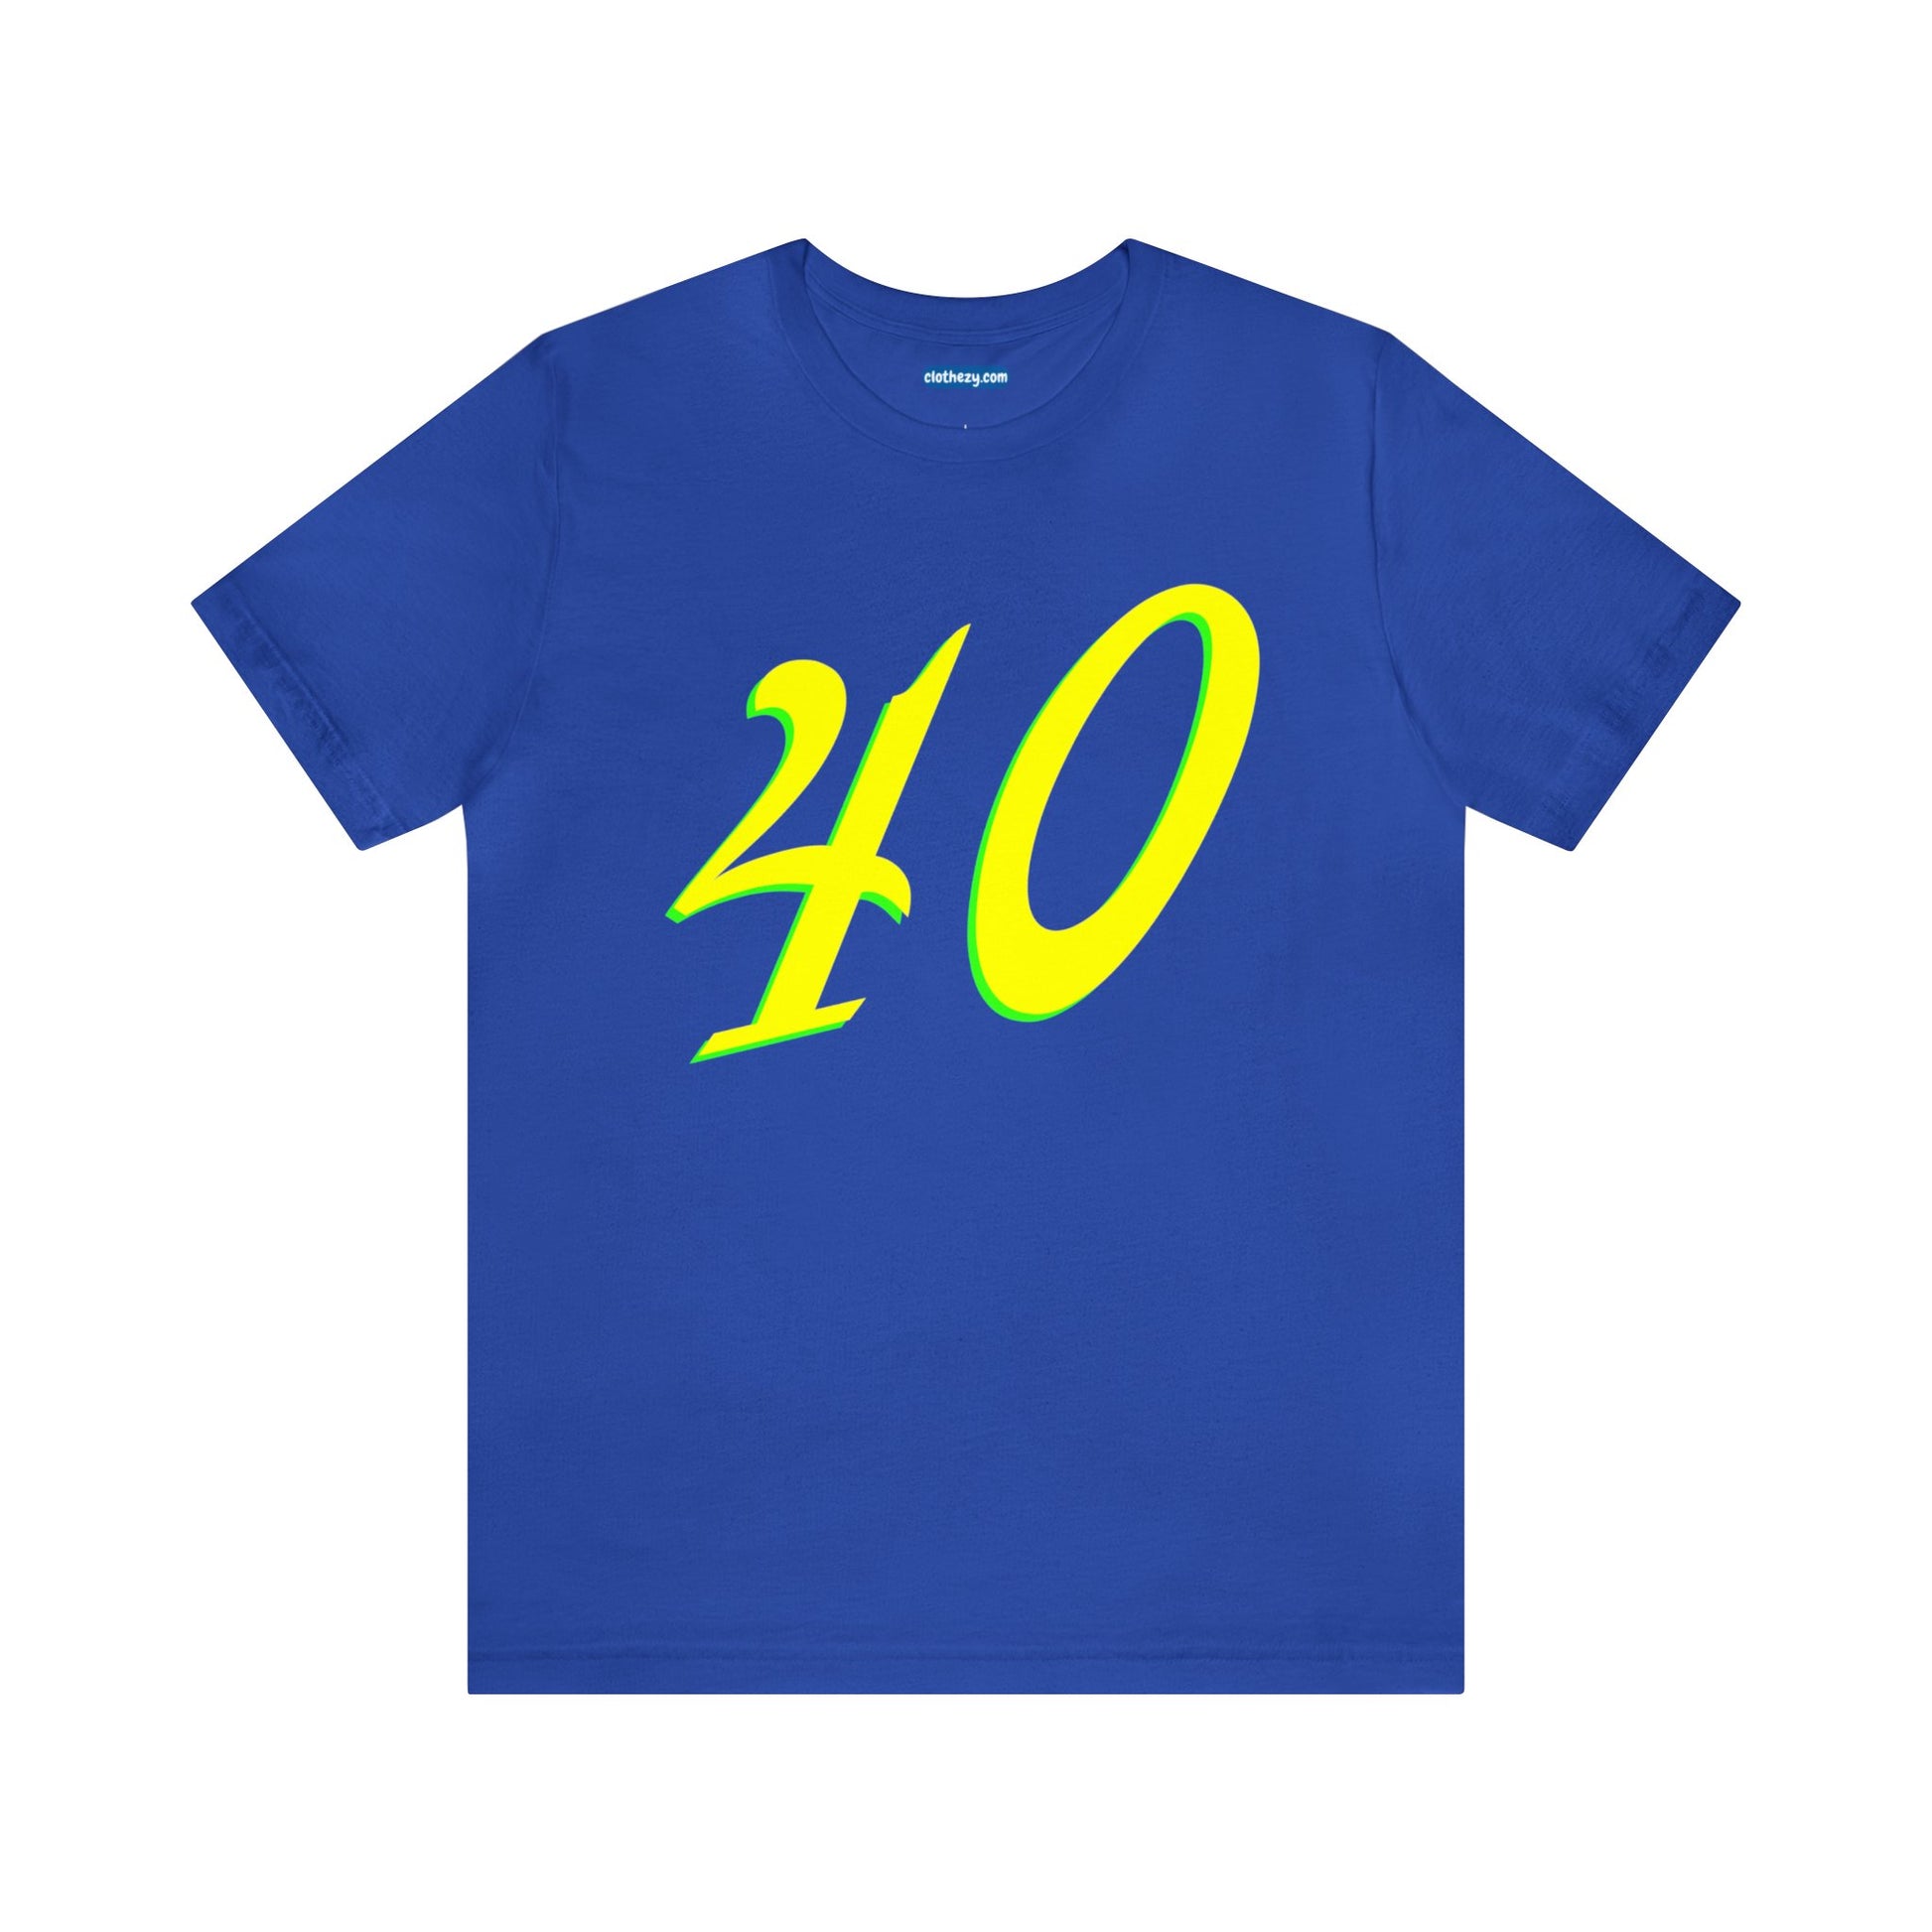 Number 40 Design - Soft Cotton Tee for birthdays and celebrations, Gift for friends and family, Multiple Options by clothezy.com in Royal Blue Size Small - Buy Now